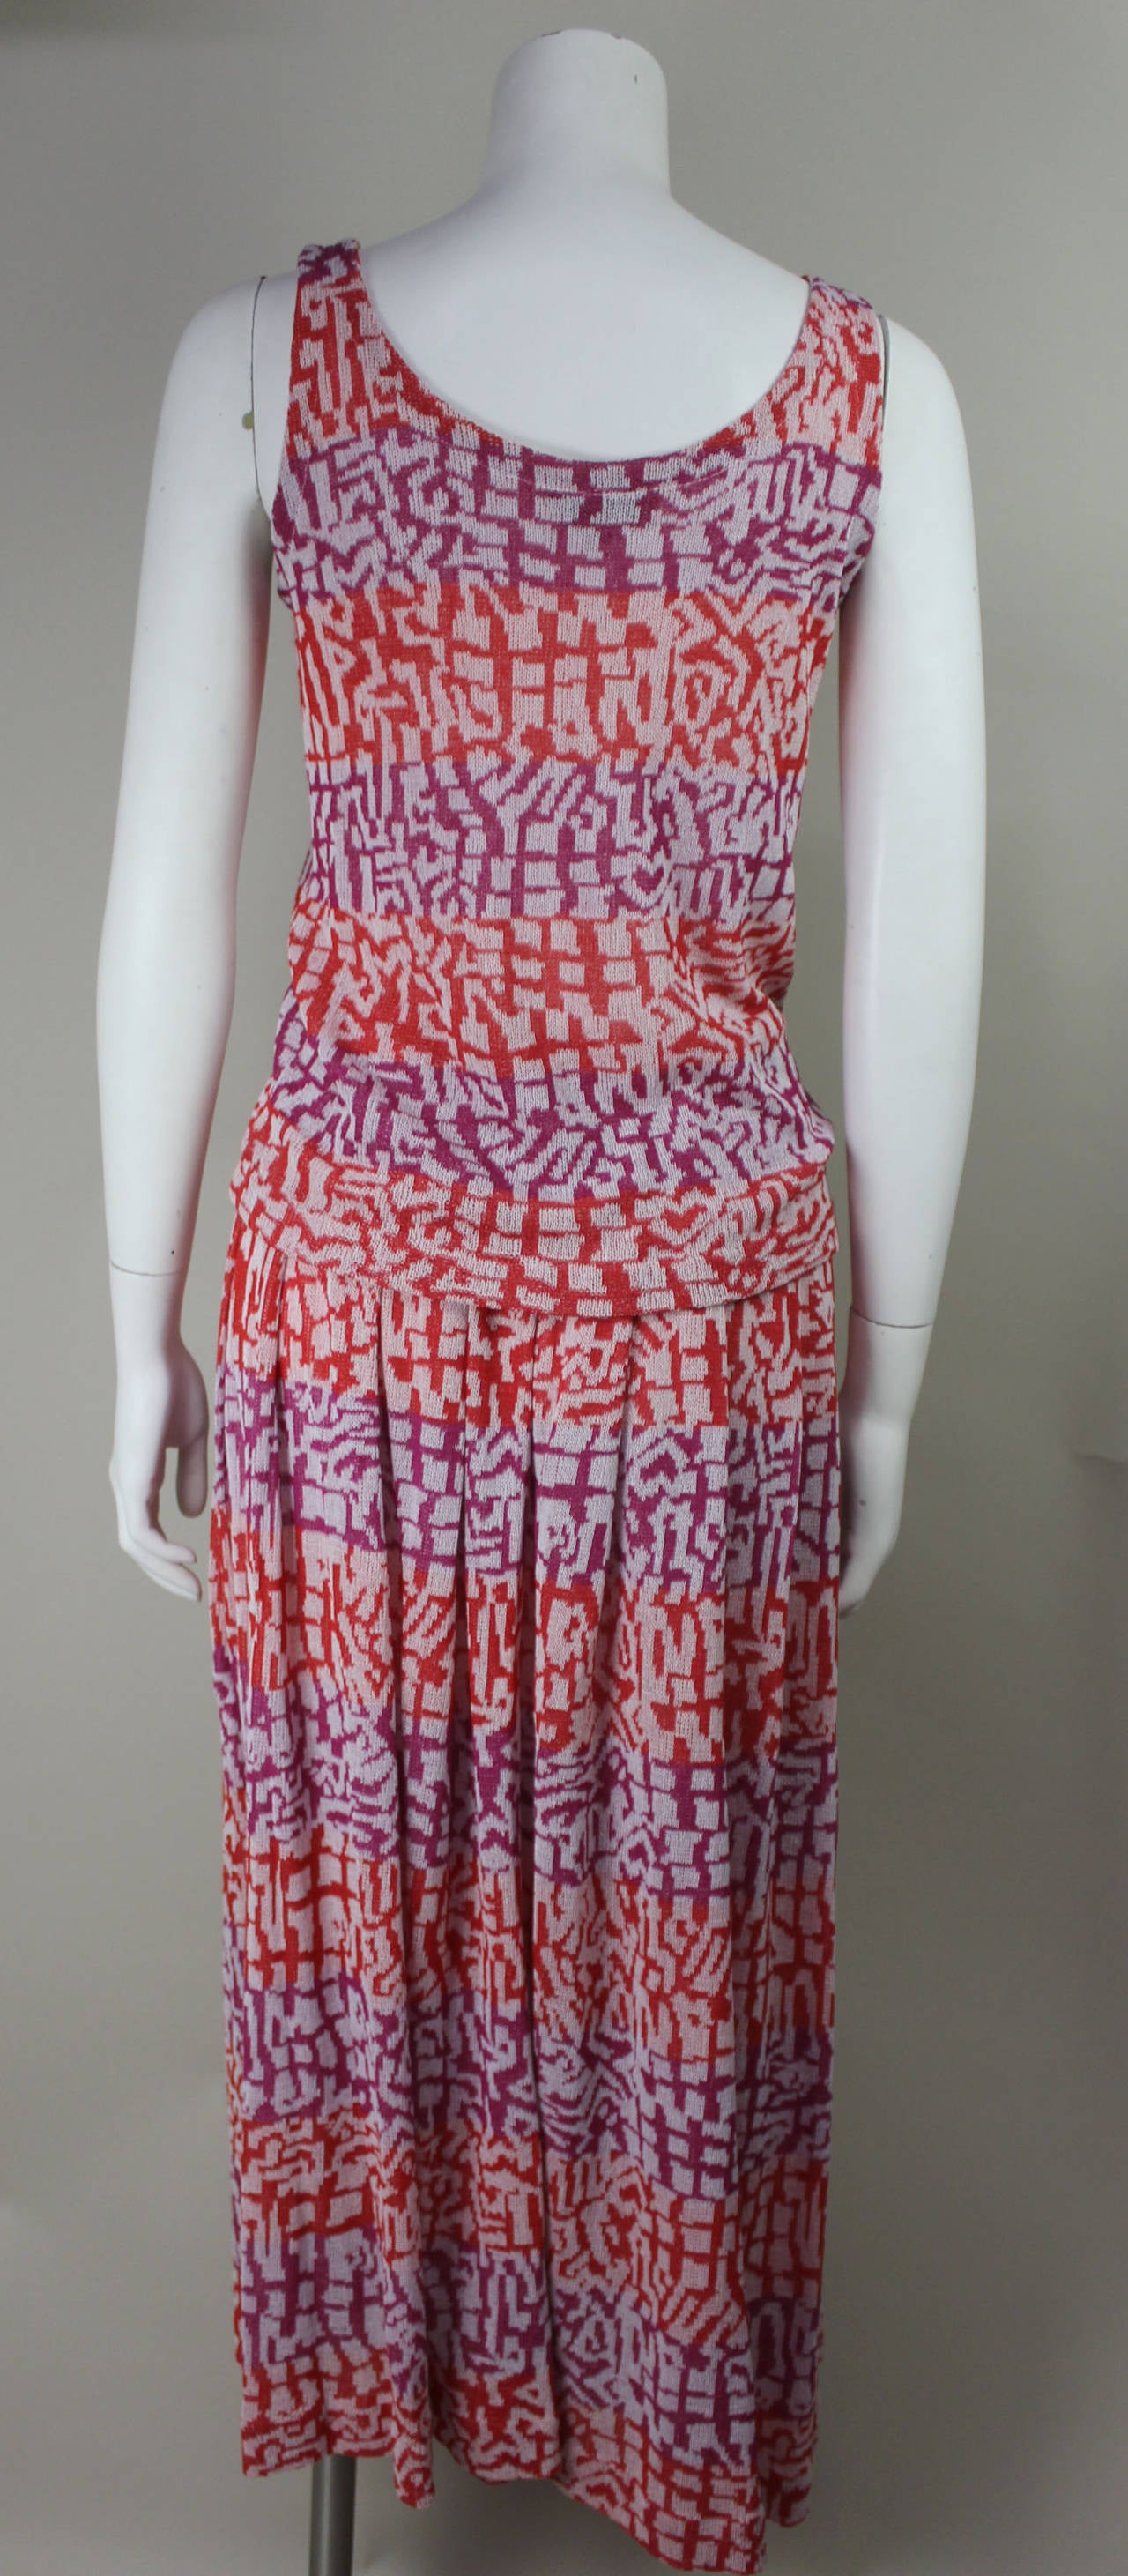 Missoni 1970s 2 Piece Knit Tank and Skirt RARE In Excellent Condition For Sale In New York, NY